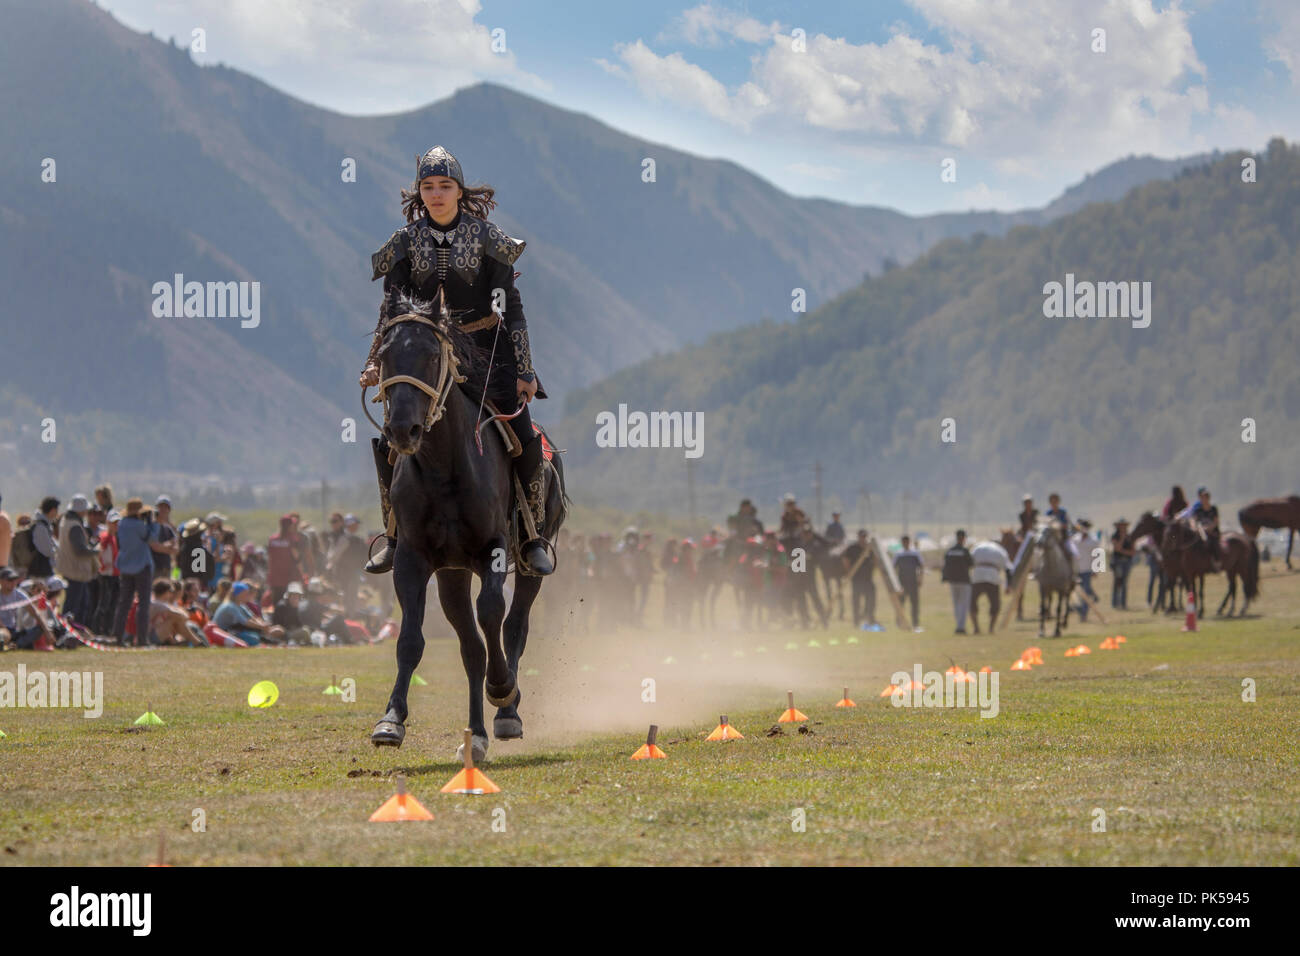 Lake Issyk-Kul, Kyrgyzstan, 6th September 2018: Woman competing in archery on horseback game Stock Photo